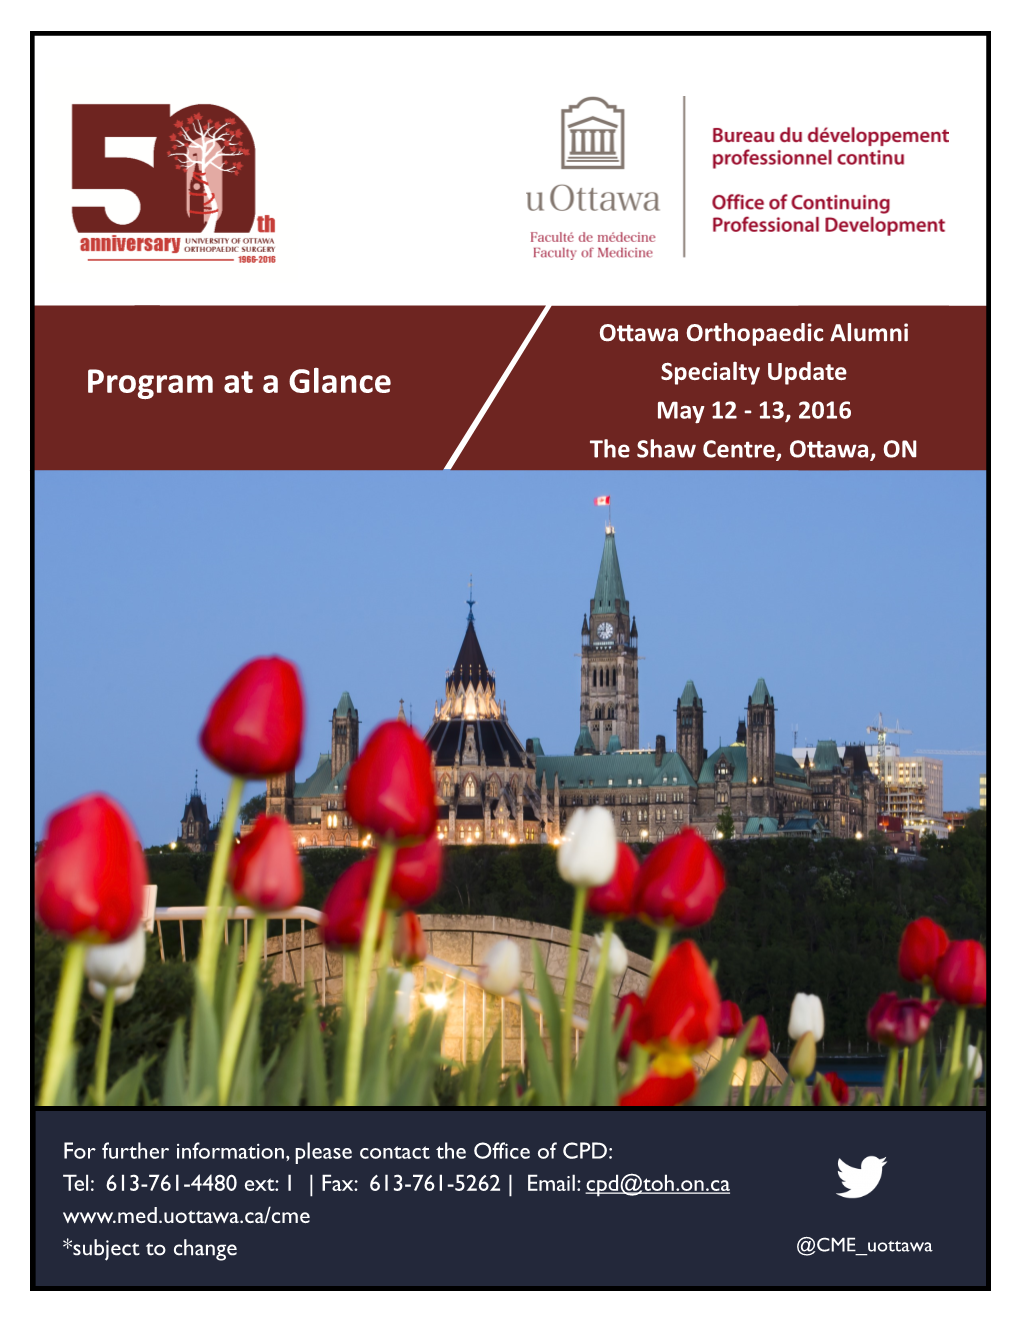 Program at a Glance Specialty Update May 12 - 13, 2016 the Shaw Centre, Ottawa, ON